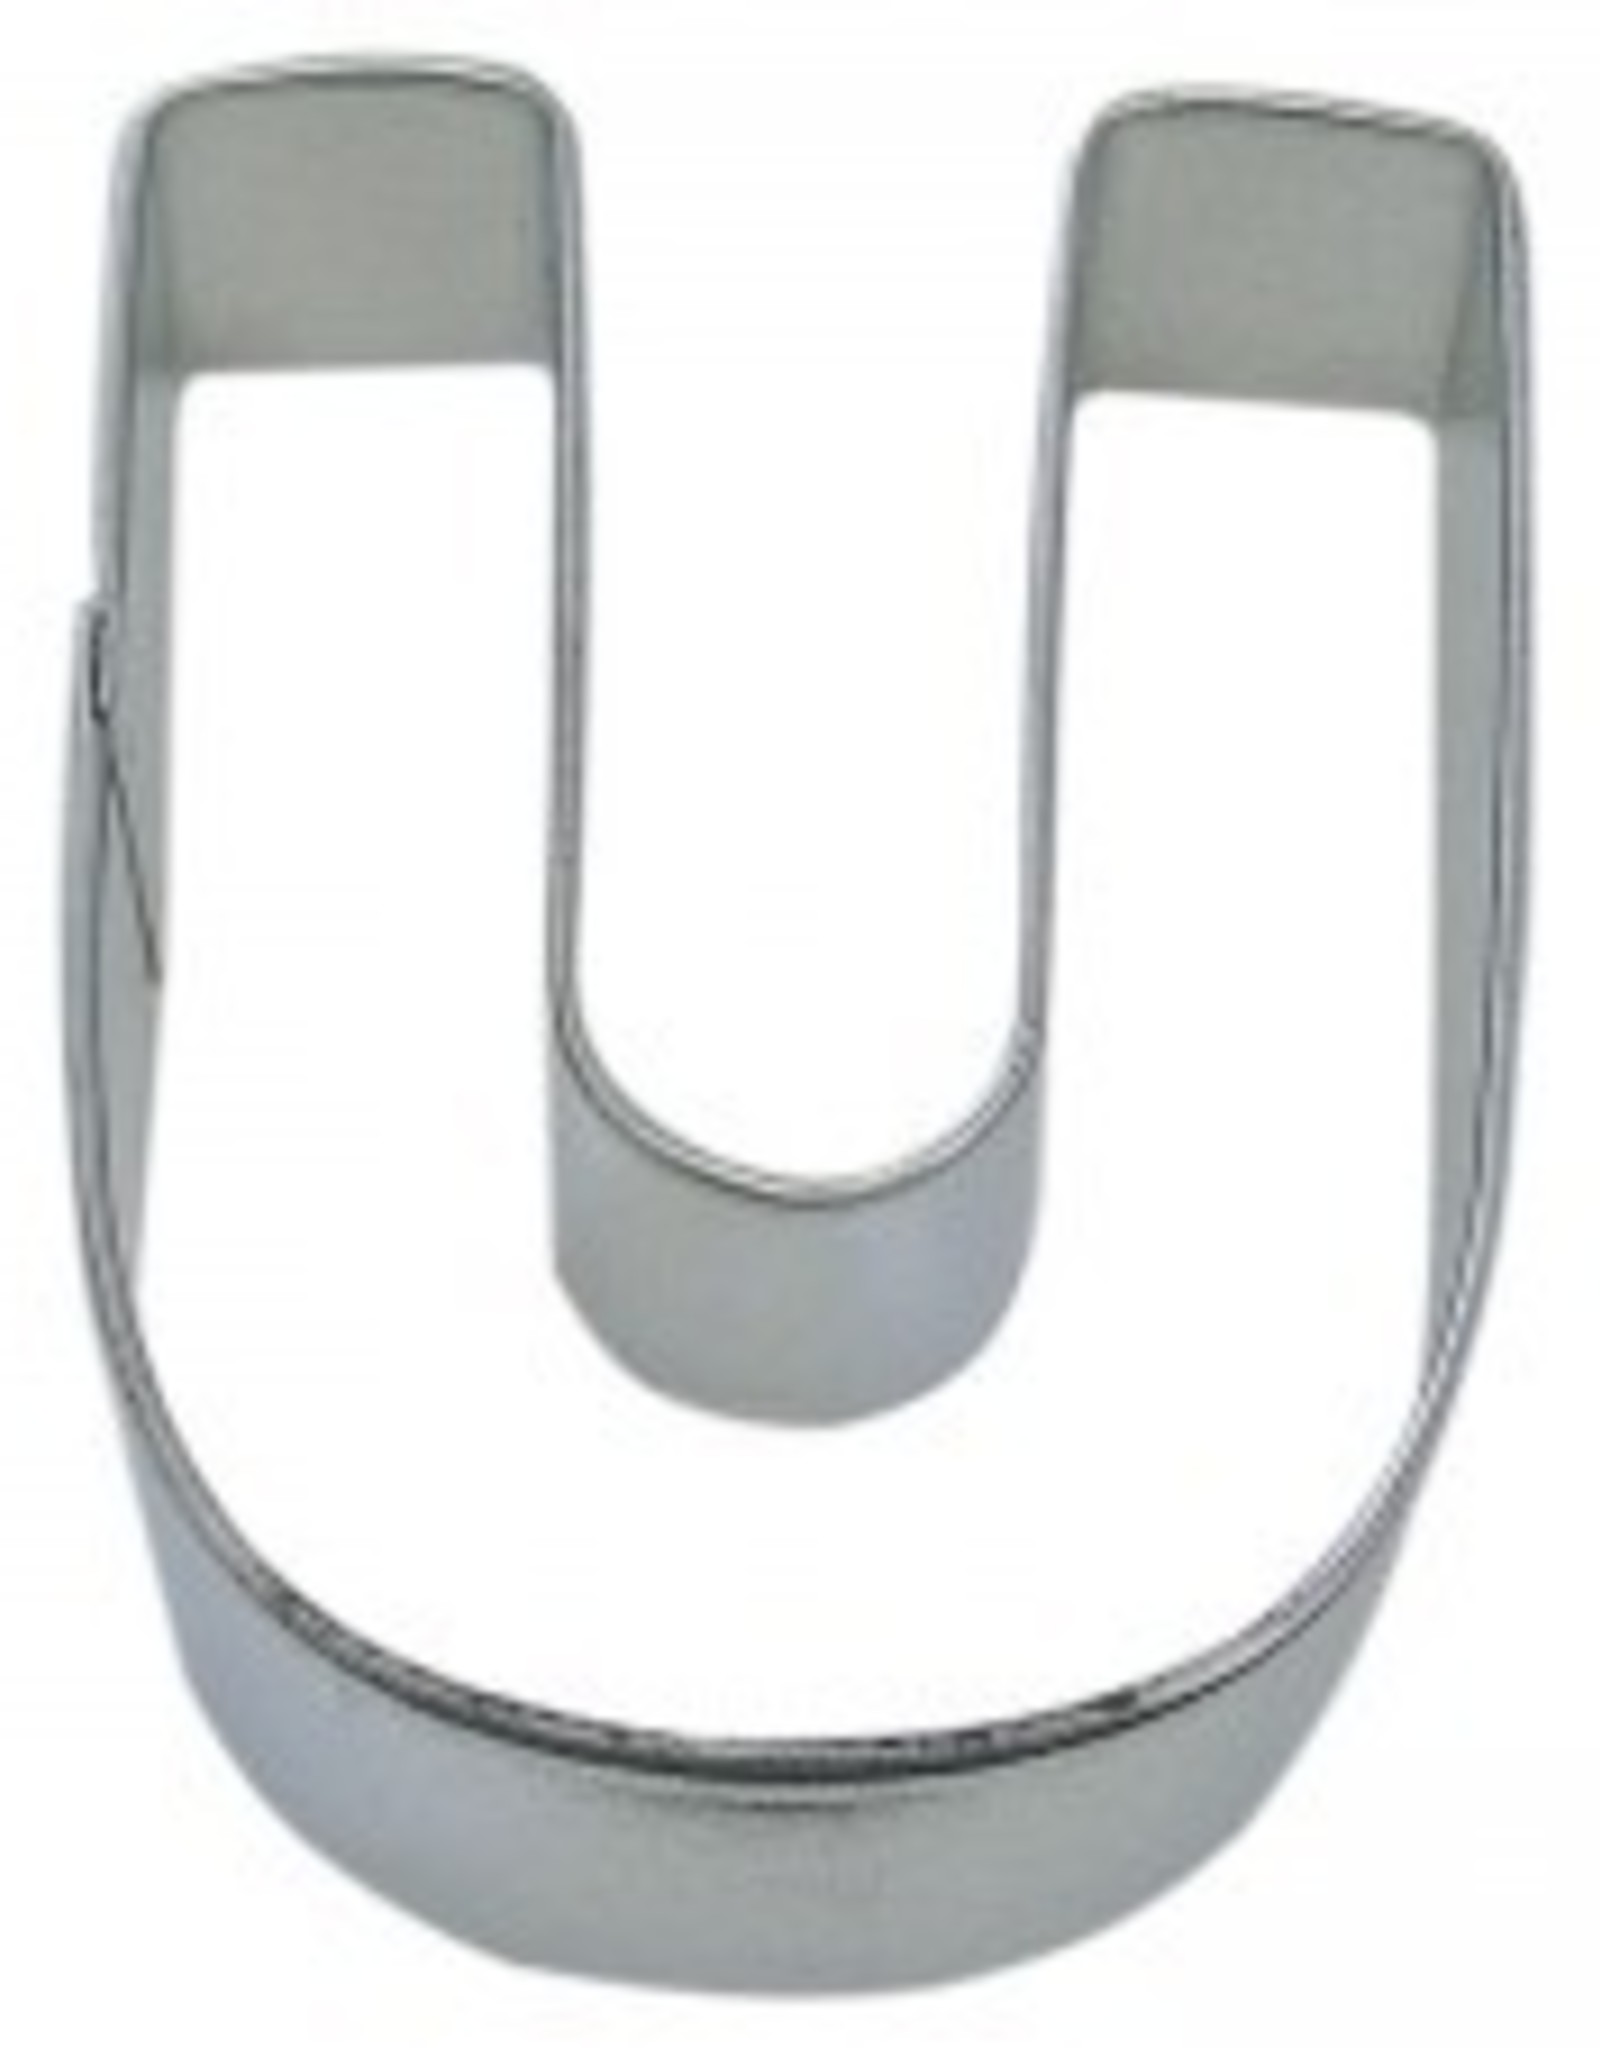 R and M Letter "U" Cookie Cutter